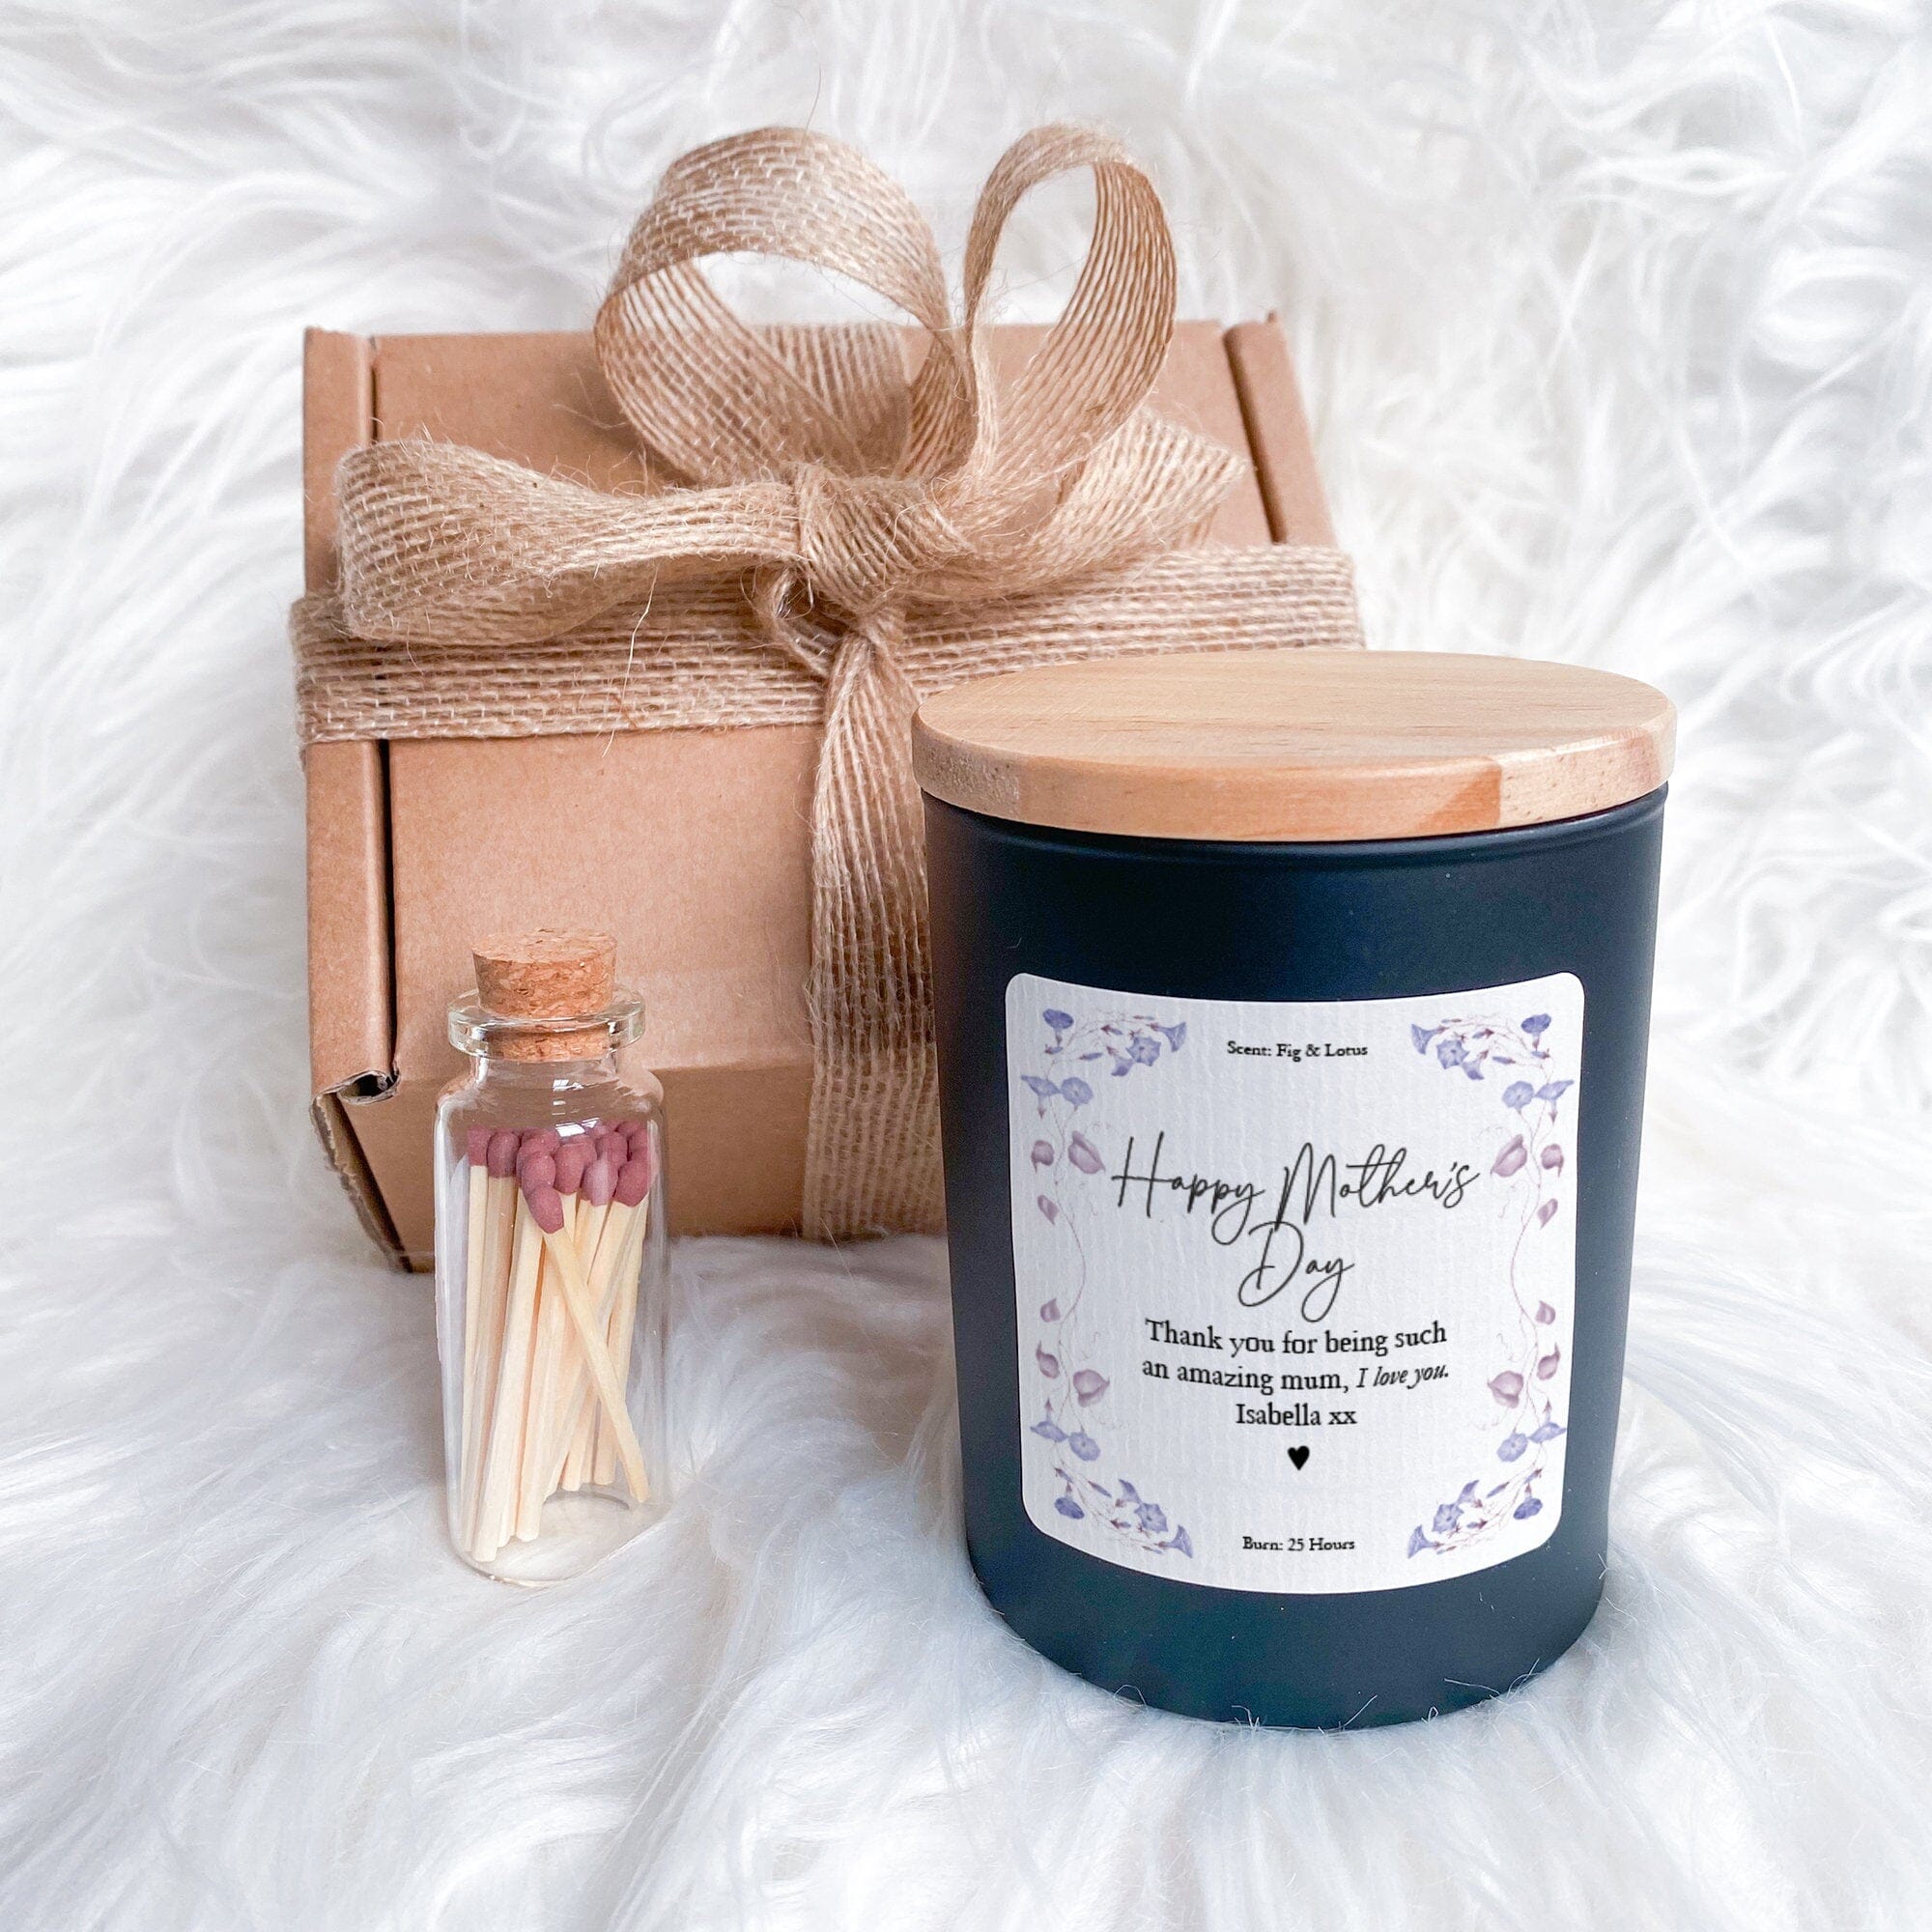 Scented Soy Wax Vegan Candle With Your Own Text Happy Mother's Day Gift For Mum Grandma Mama Nanny Nana Gran Granny